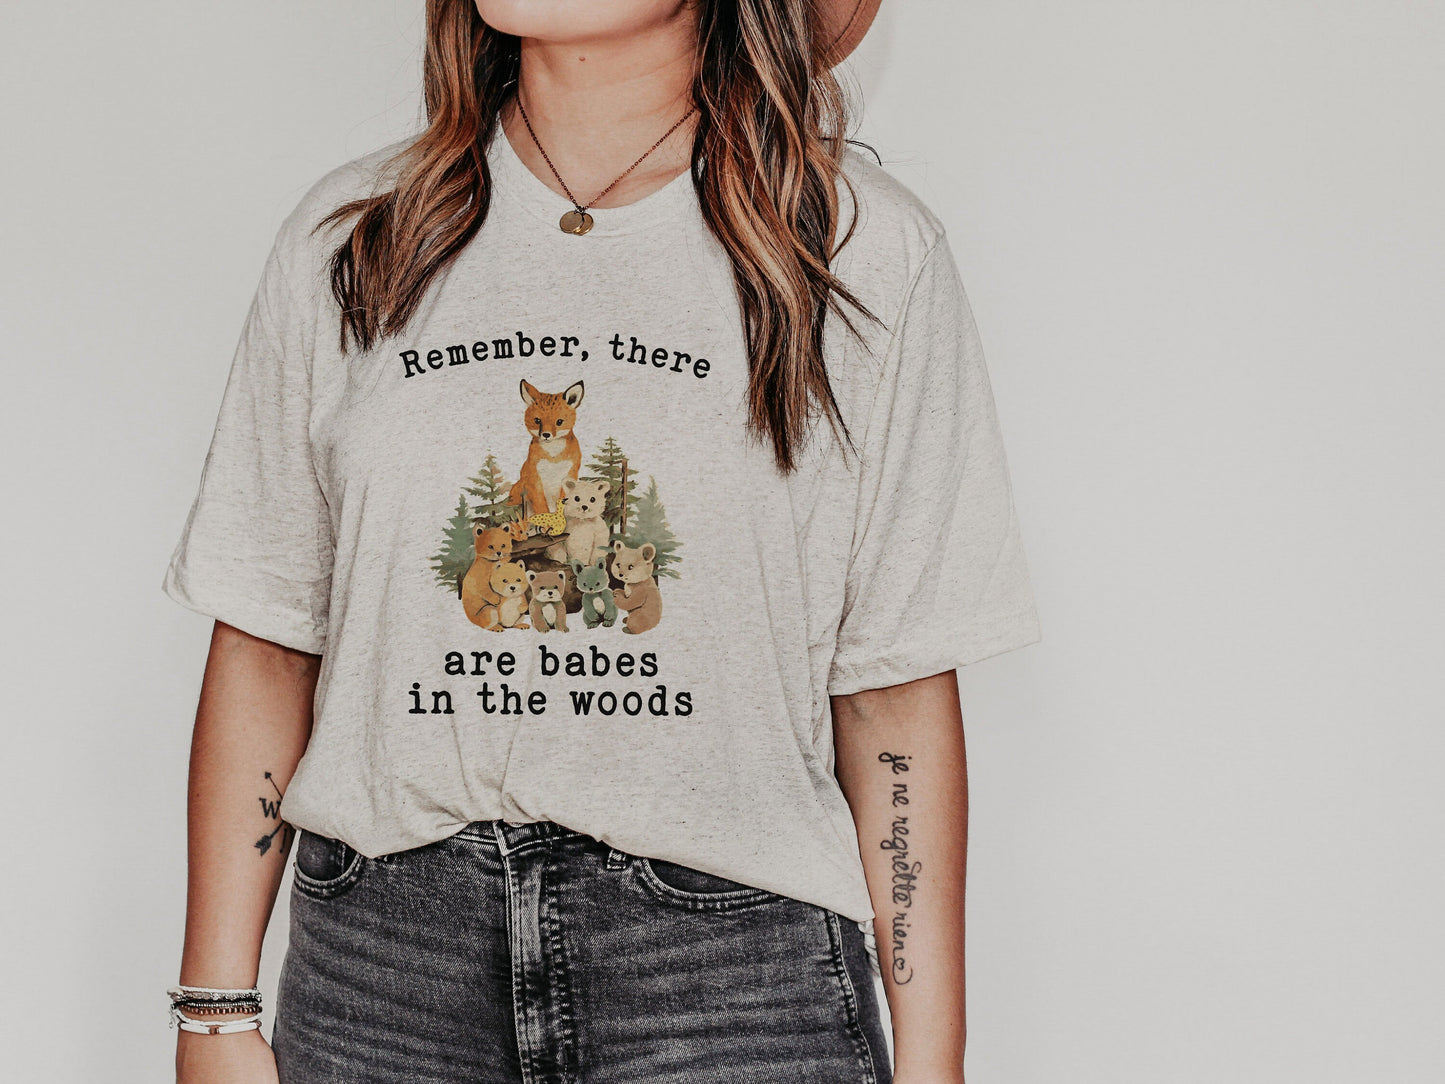 Vintage 80's 90's There Are Babes in the Woods Smokey Bear Inspired Nostalgia Unisex Soft Tee T-shirt for Women or Men